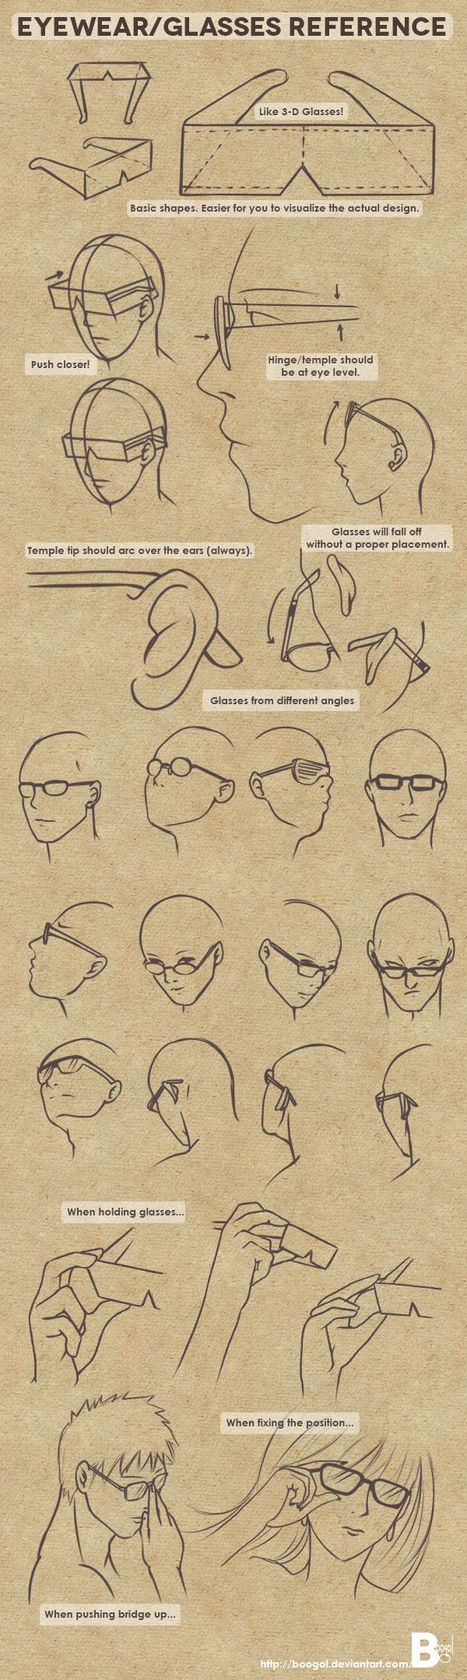 Glasses Drawing Reference Guide | Drawing References and Resources | Scoop.it